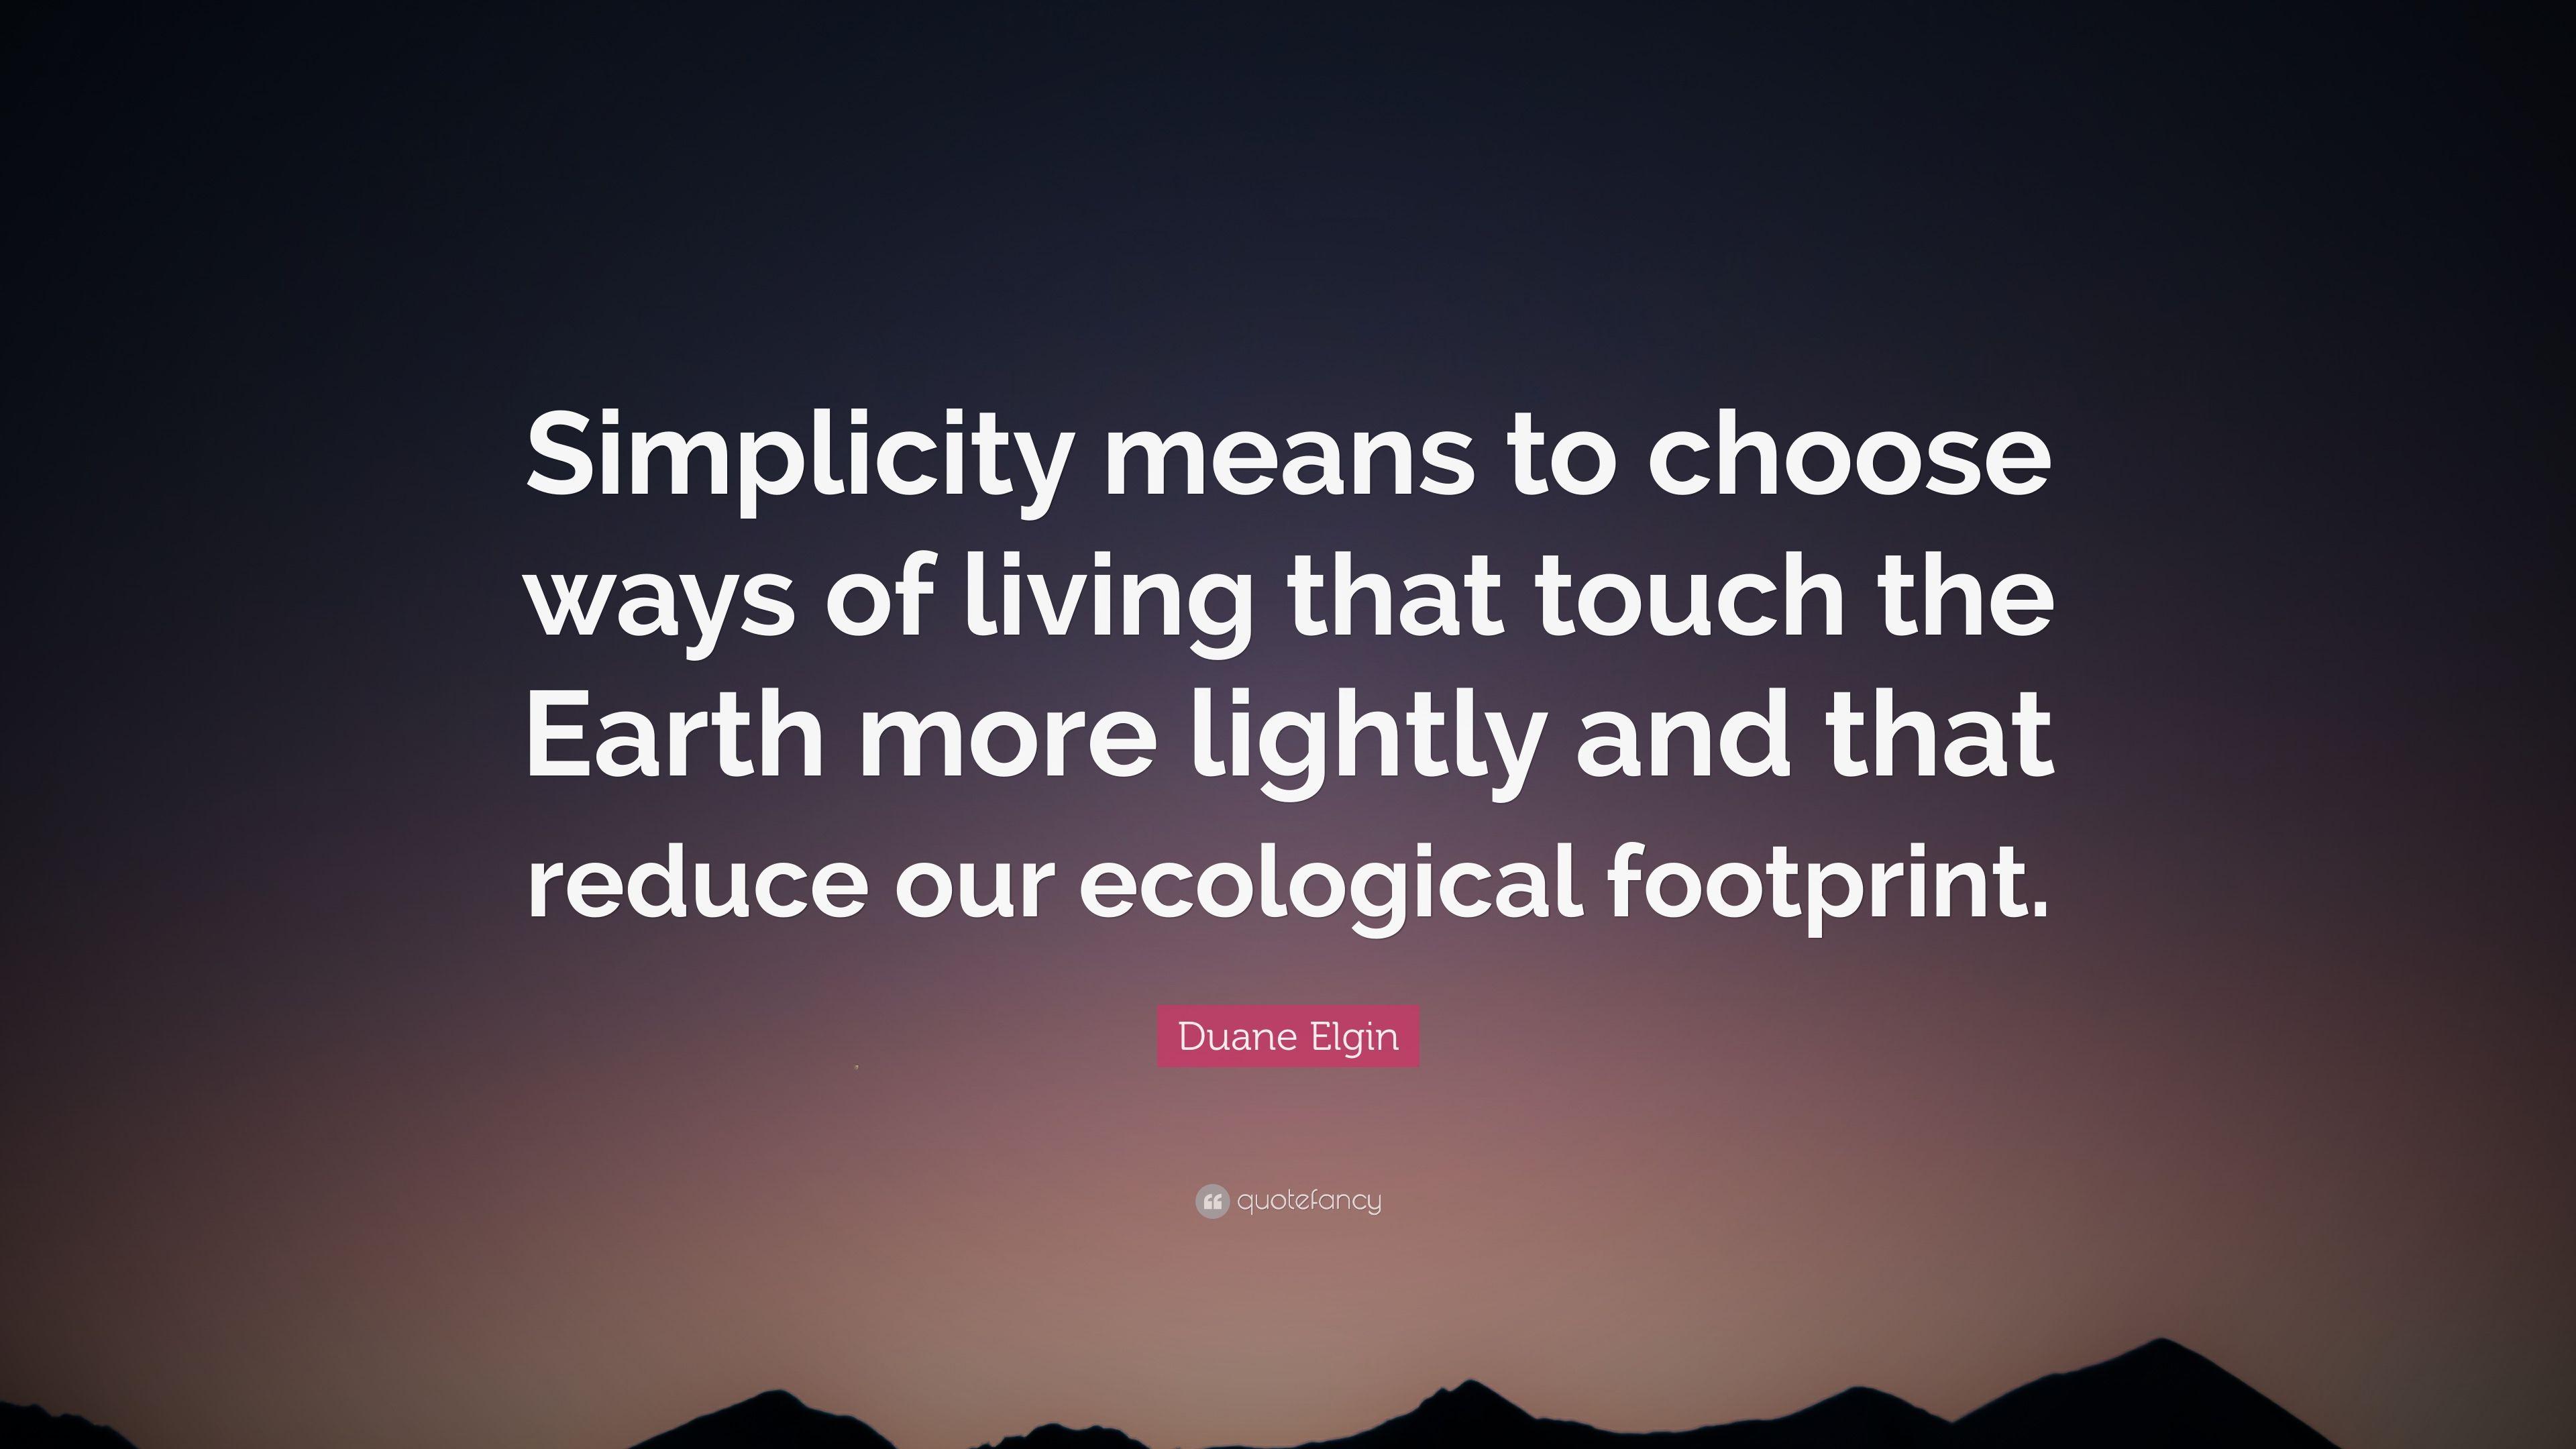 Duane Elgin Quote: “Simplicity means to choose ways of living that